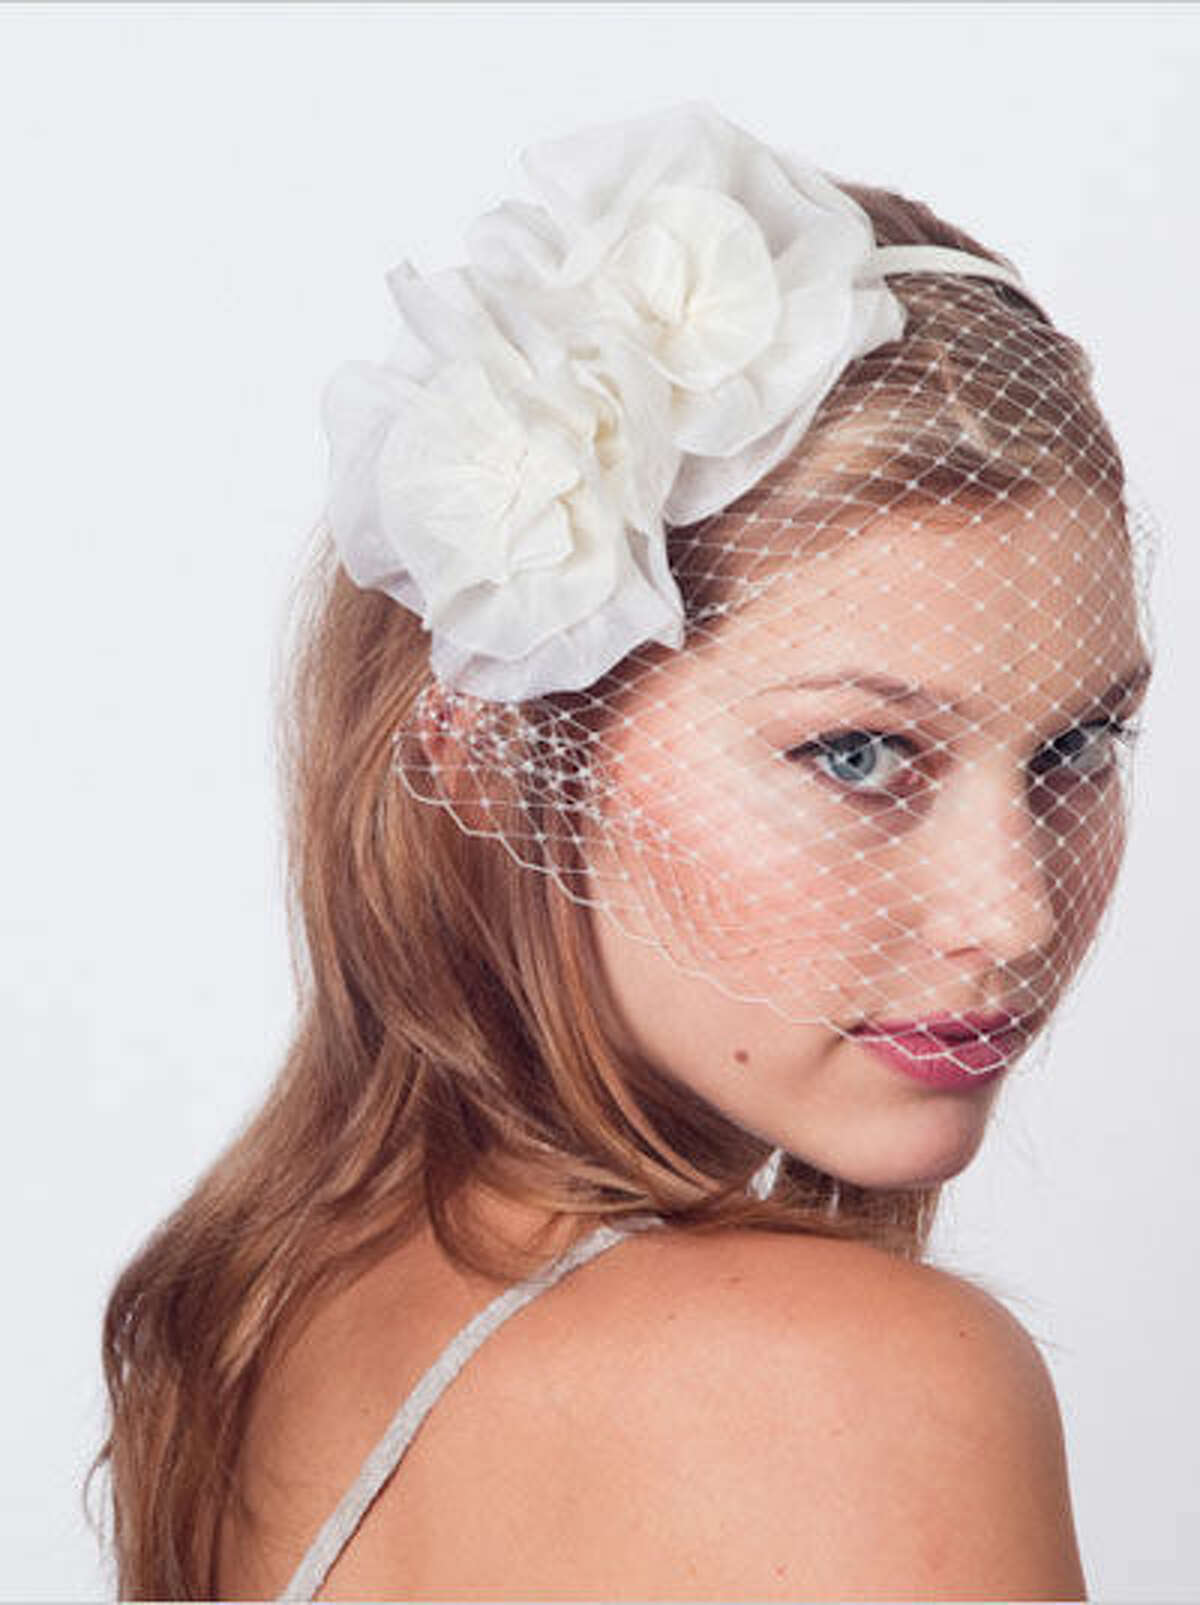 An elegant vintage look with a touch of modern style, the Flower Blossom Birdcage Veil from Jane Tran is affixed to a thin headband for easy wear with long styles. $98, available at Adam Broderick Salon & Spa, Ridgefield